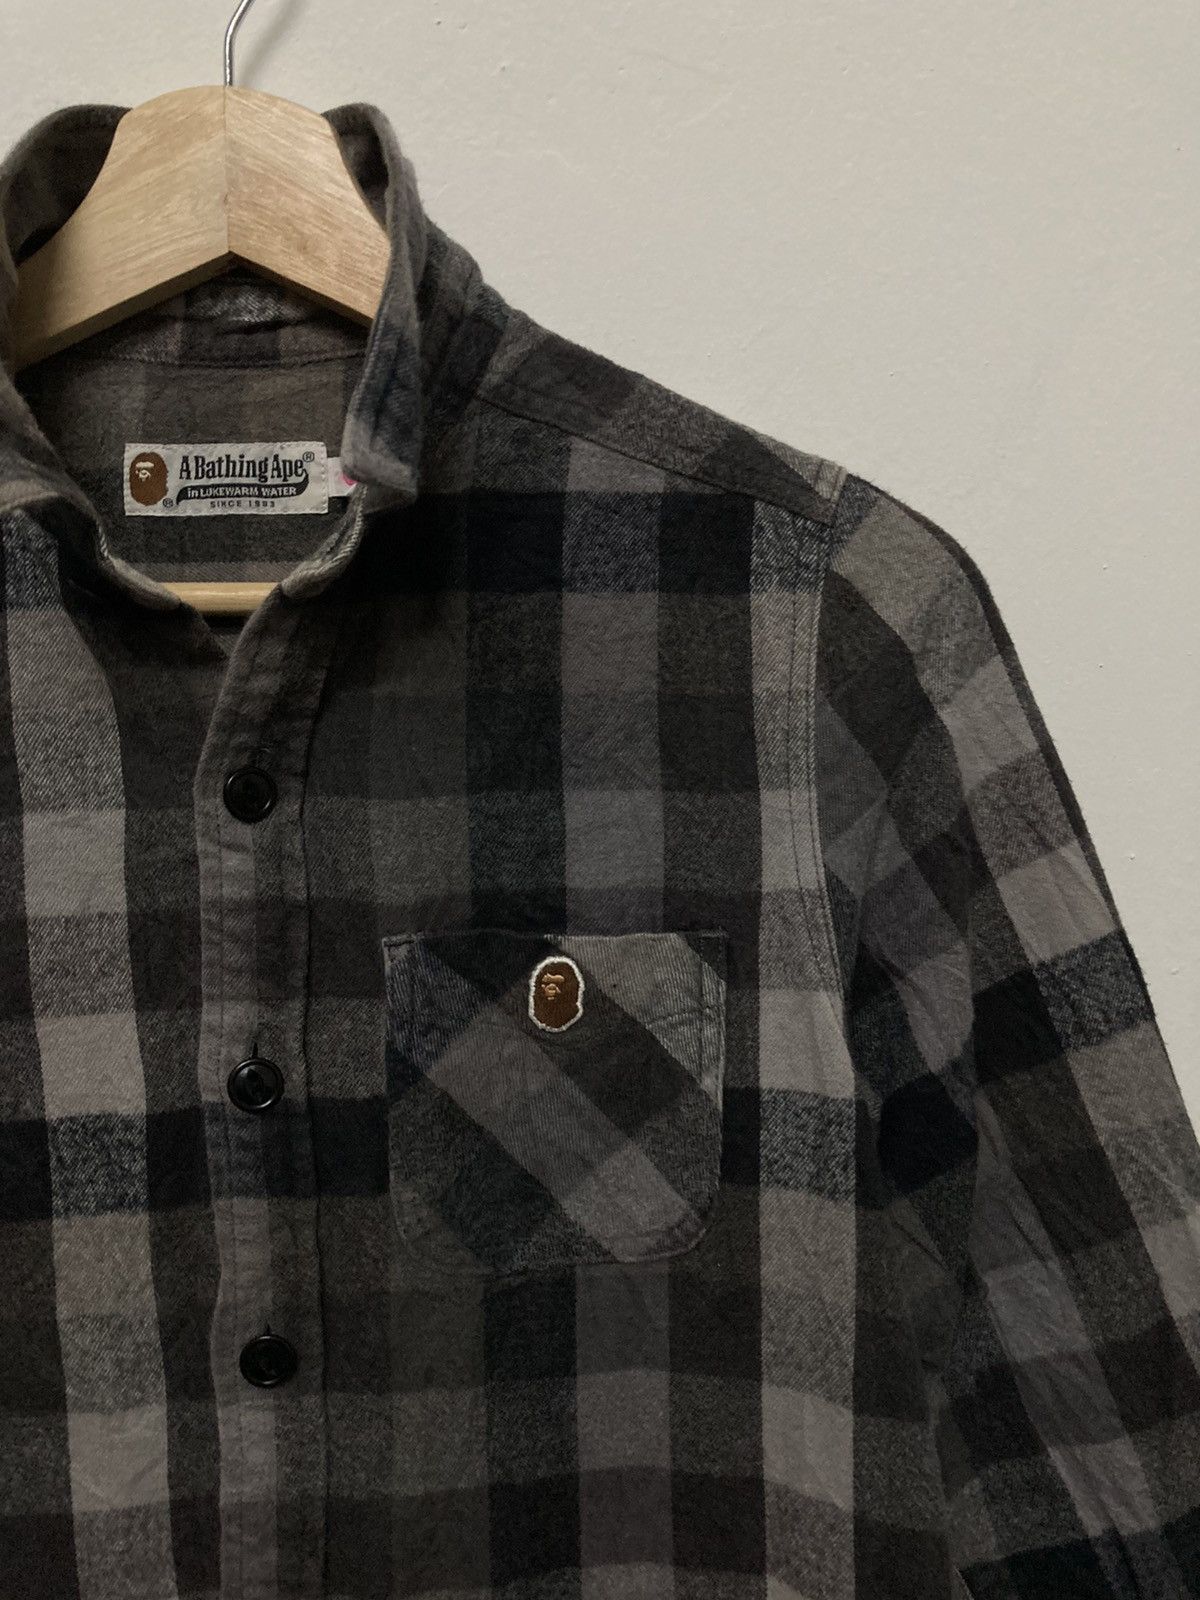 Bape Button Up Checker Flannel Shirt Made in Japan - 4